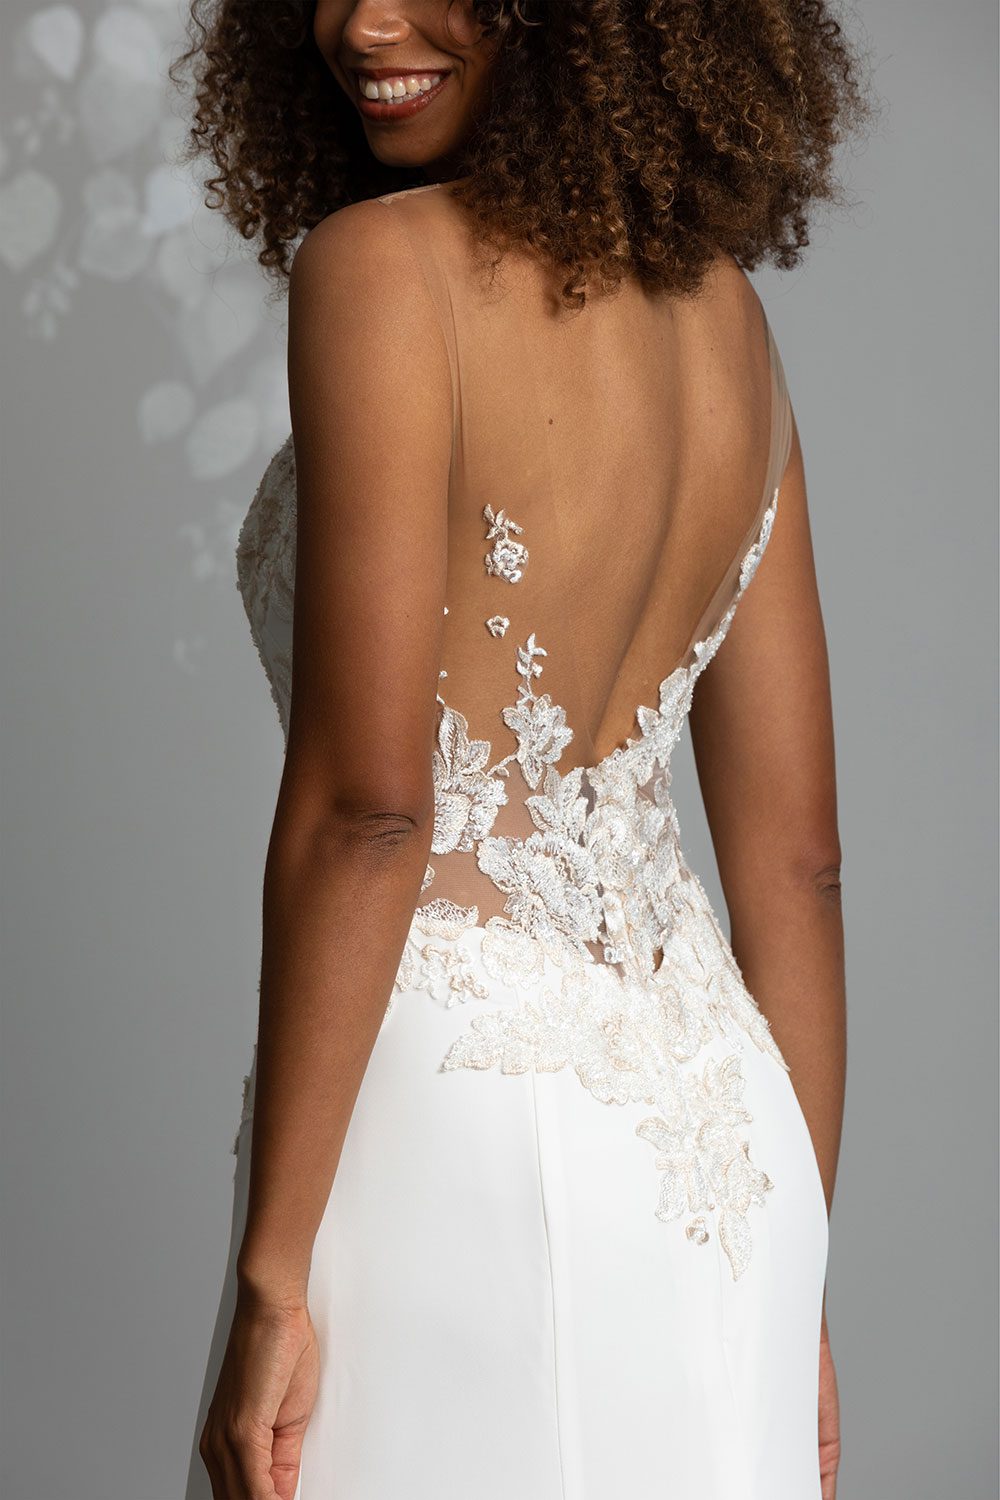 Samantha Wedding Dress from Vinka Design. This beautiful wedding dress has a nude sheer illusion strapless neckline made from fine Italian tulle. Low sheer back & structured bodice, & soft crepe train. Model showing full length back view of dress with low sheer illusion back with delicate lace